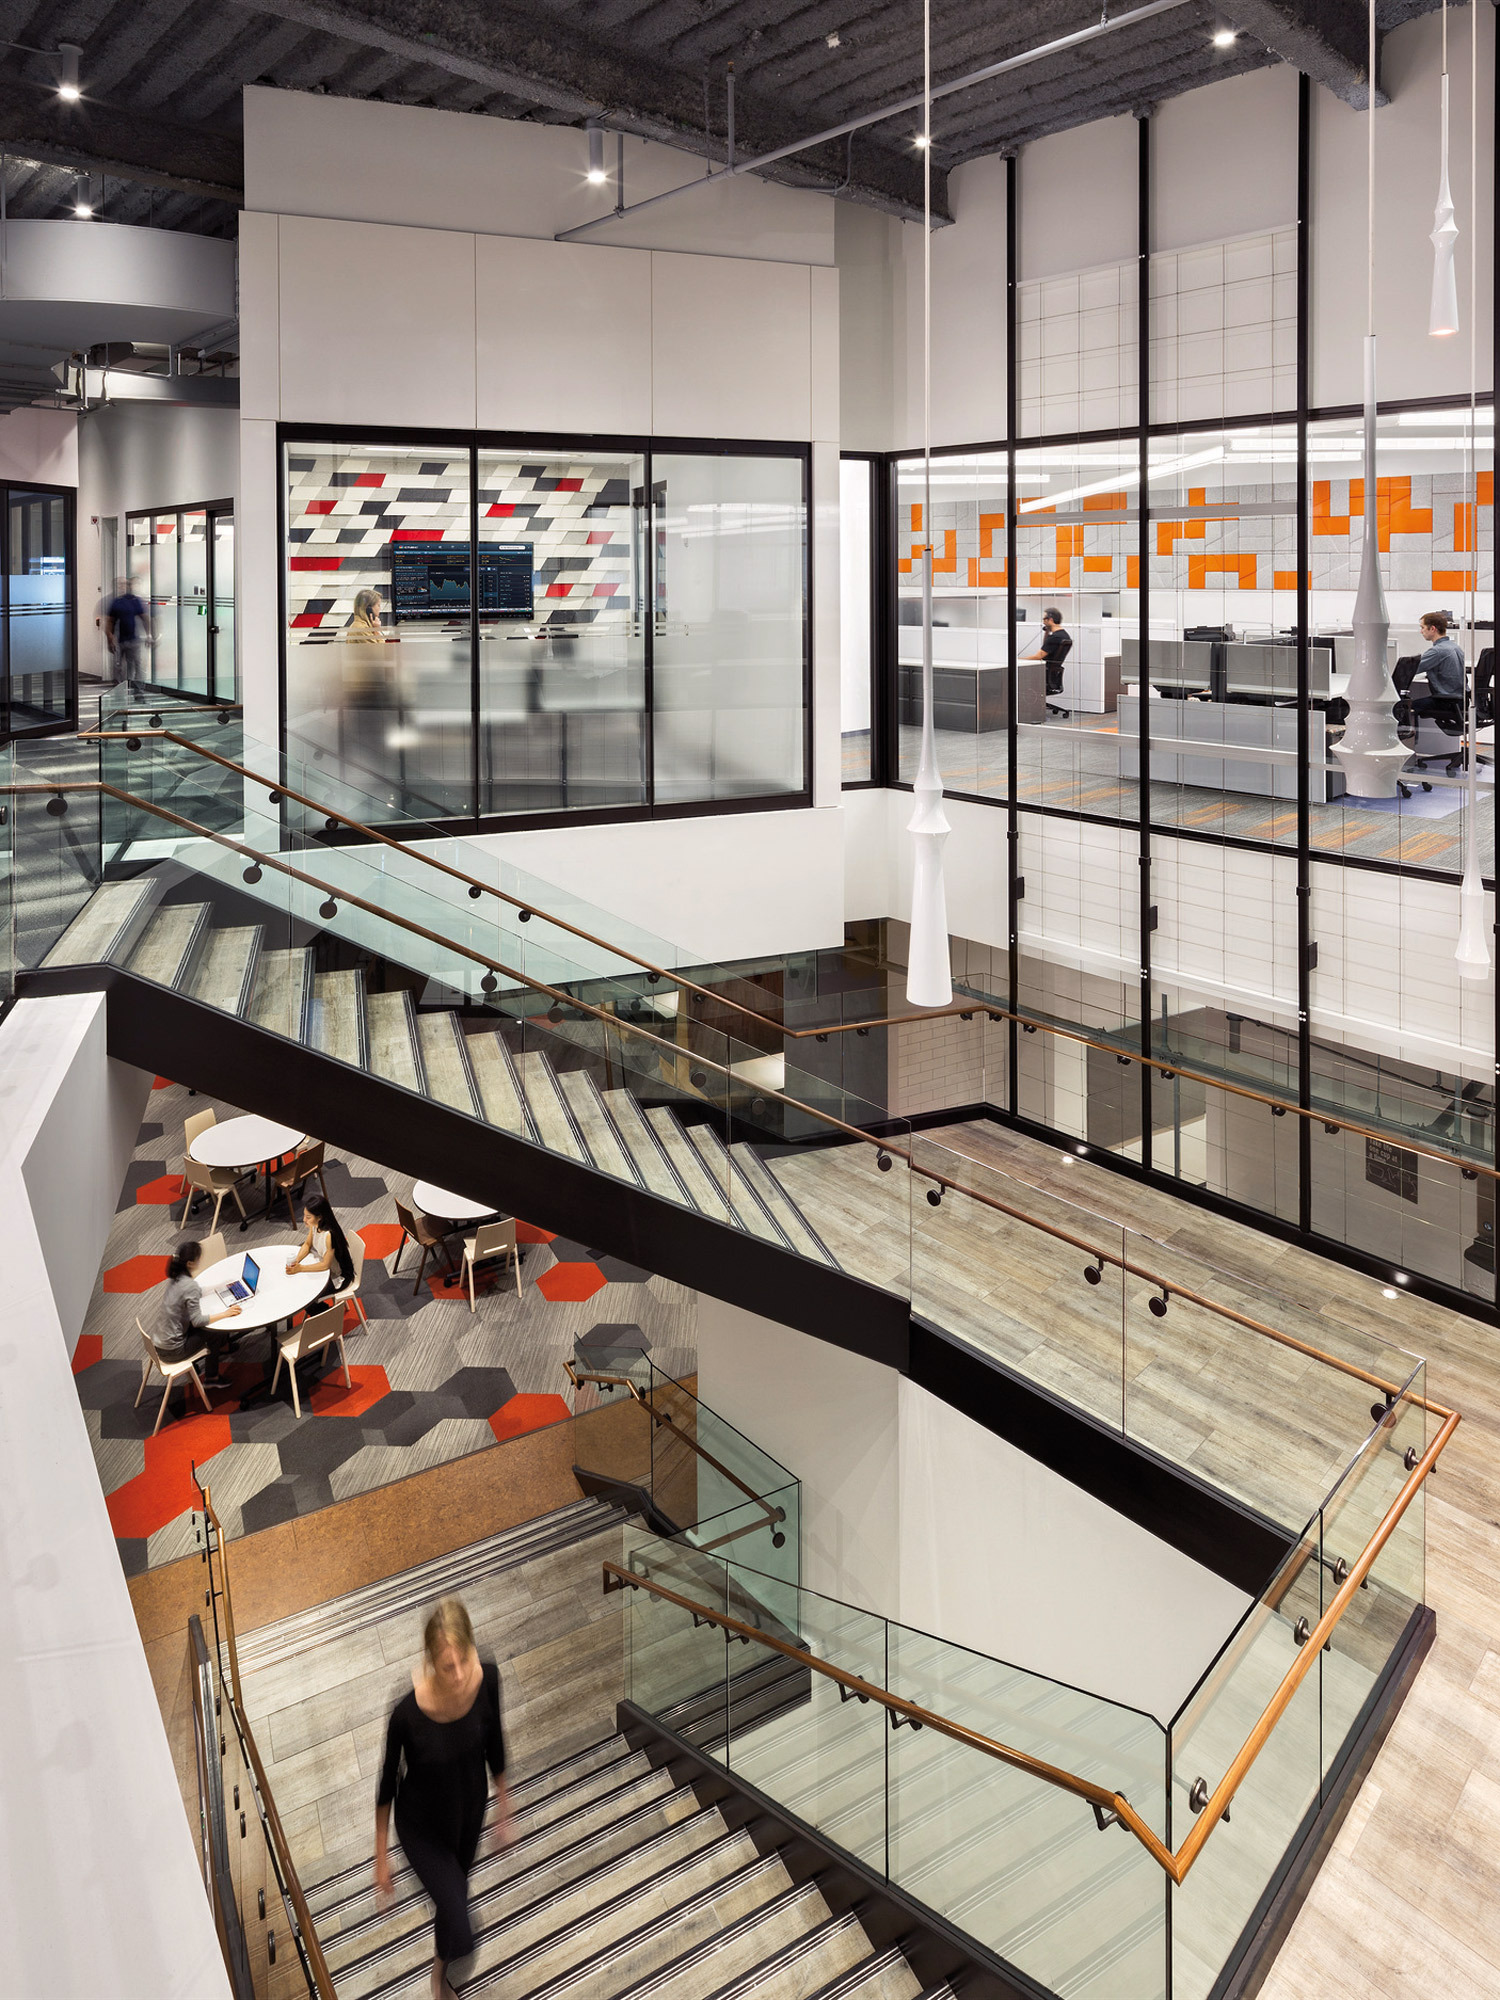 Modern office interior with an open floor plan features a floating glass staircase connecting two levels, accented by sleek metal handrails. The design incorporates a mix of neutral toned floor tiles and vibrant orange wall accents, optimizing the space for both collaborative and independent work areas.